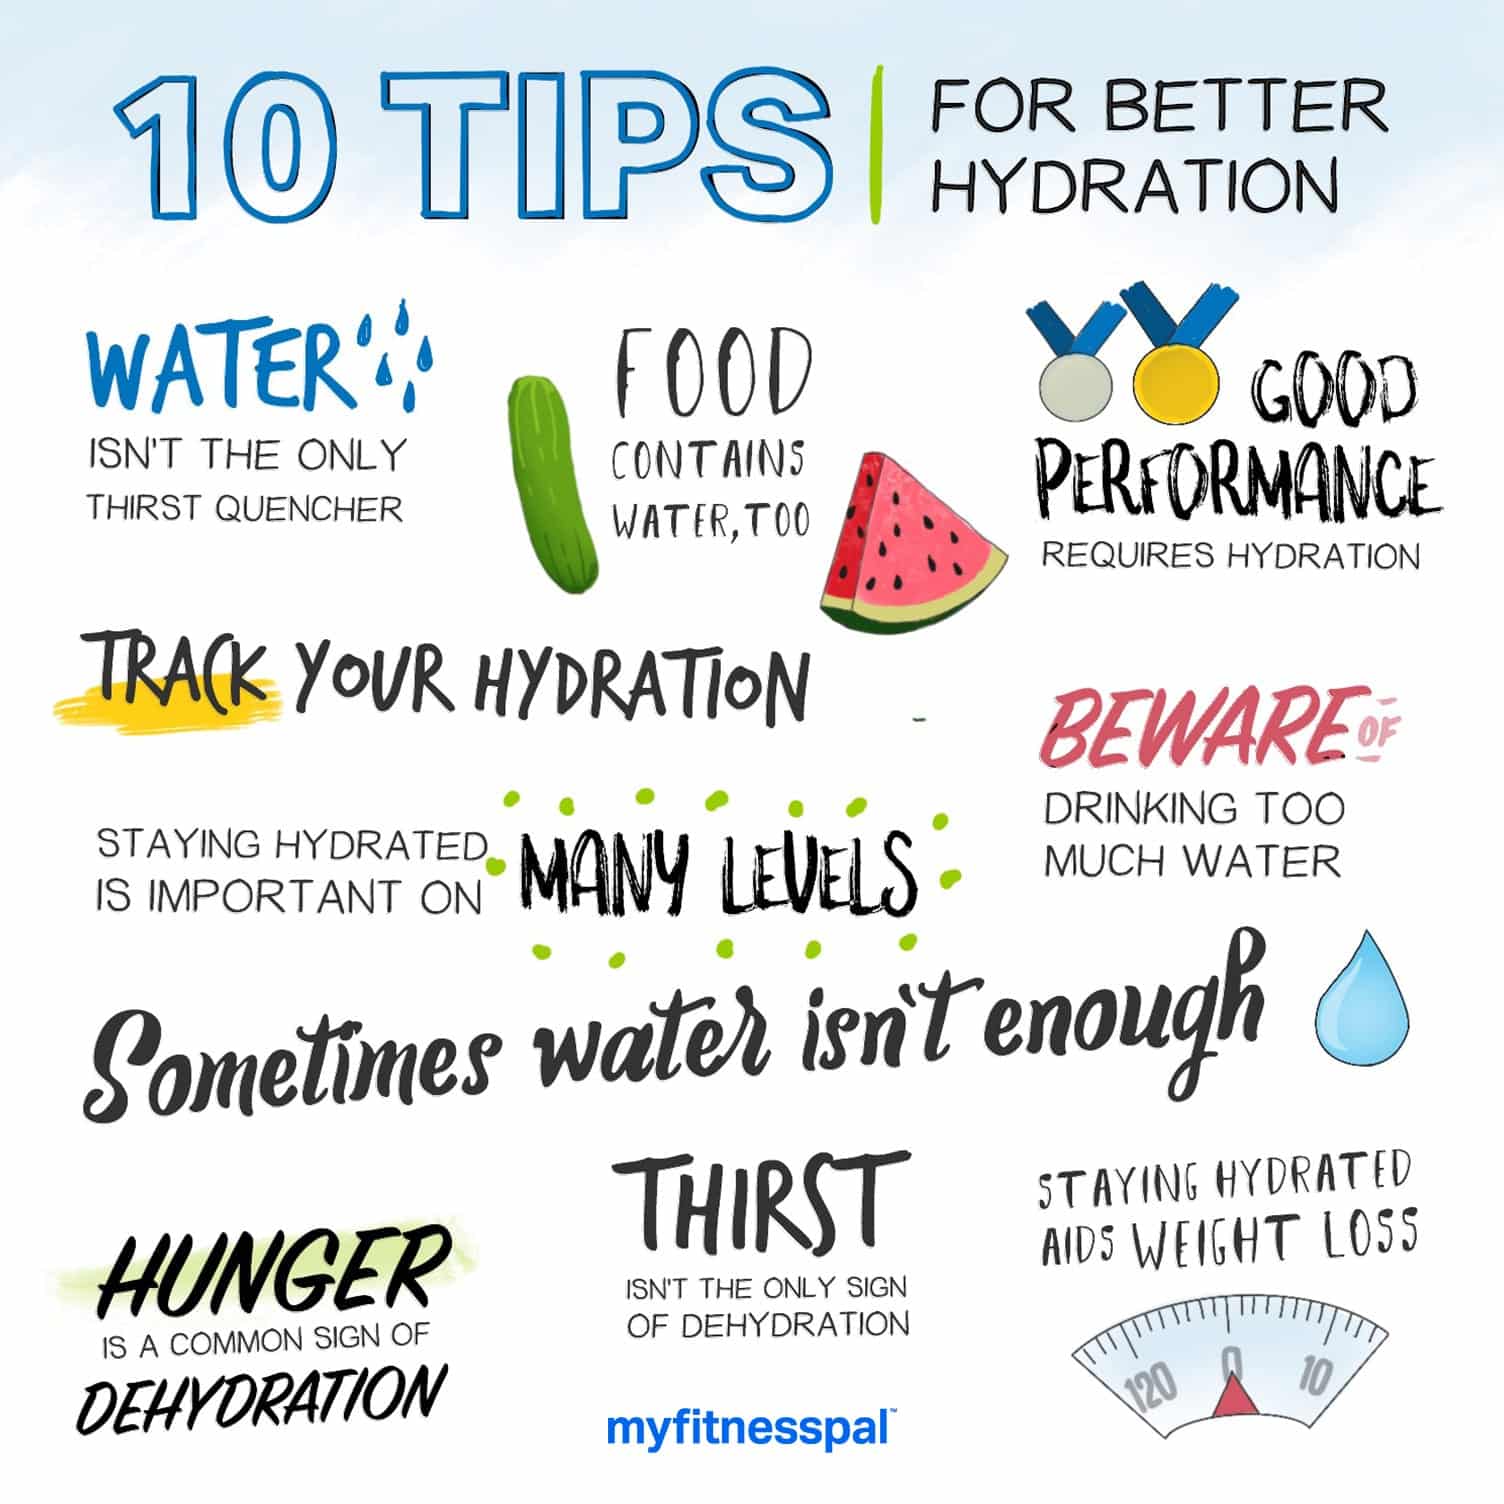 Sports hydration tips